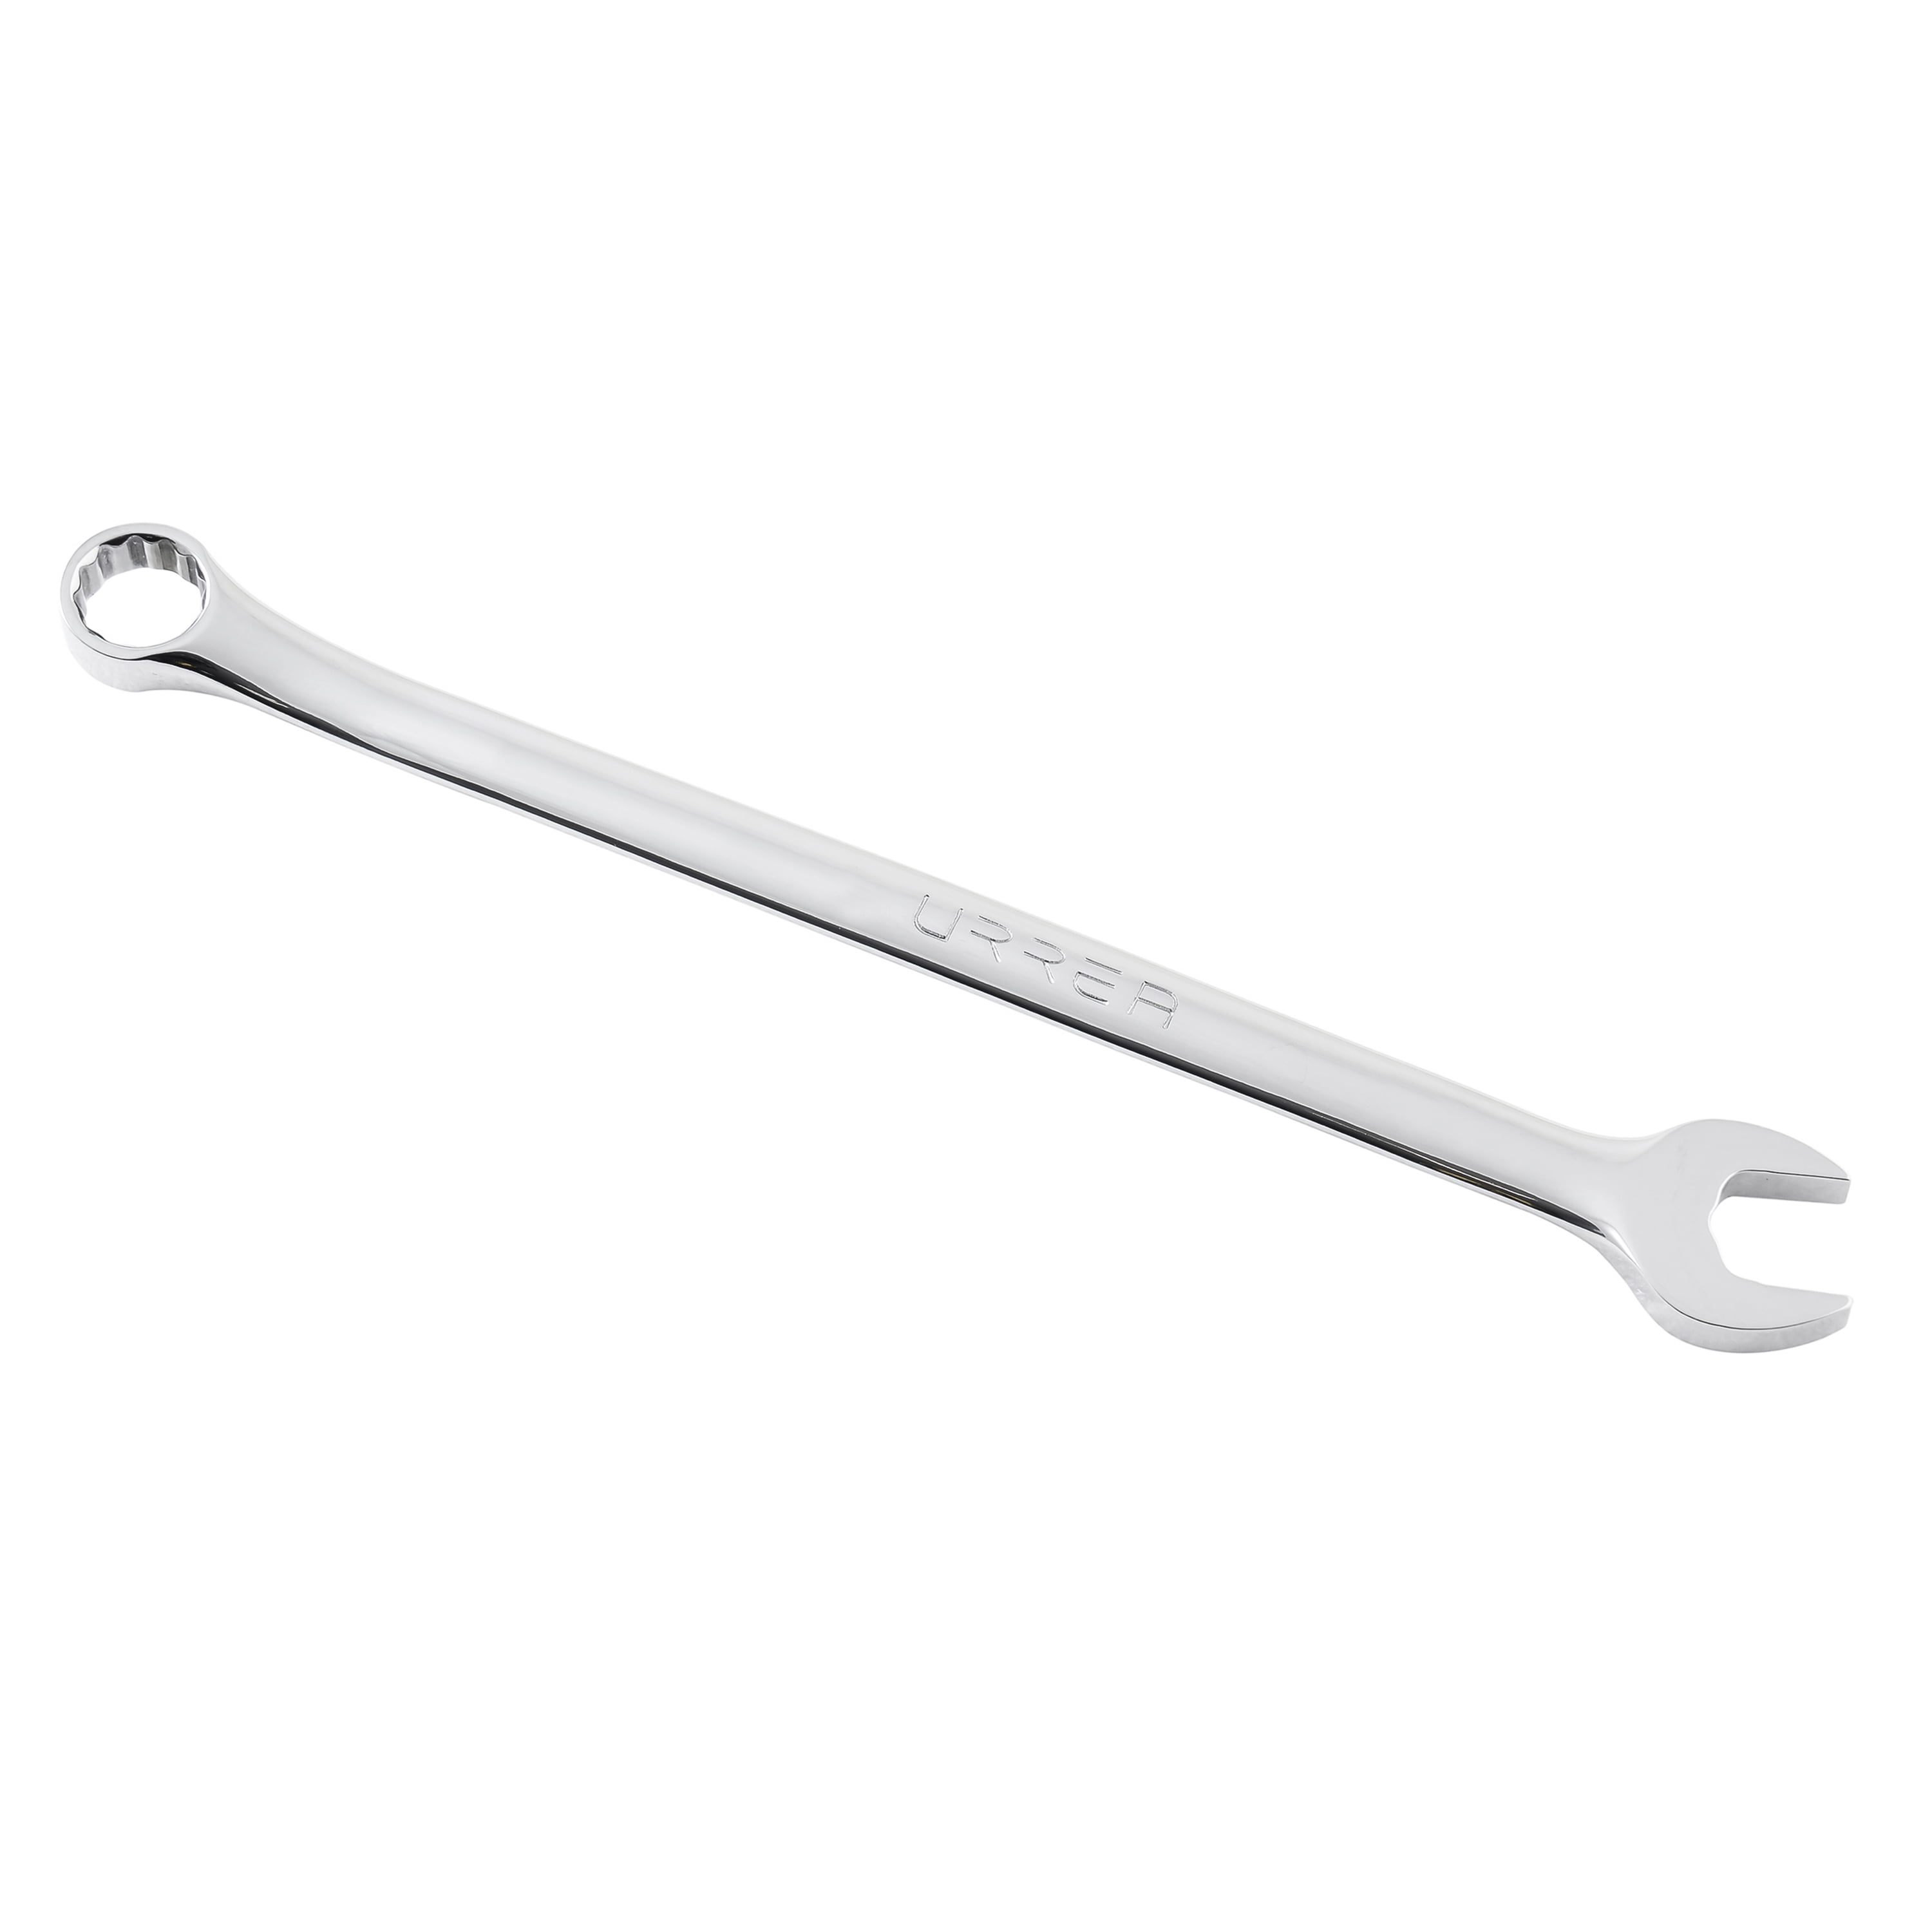 URREA 1216H 1/2-INCH 6-POINT COMBINATION WRENCH,CHROME 